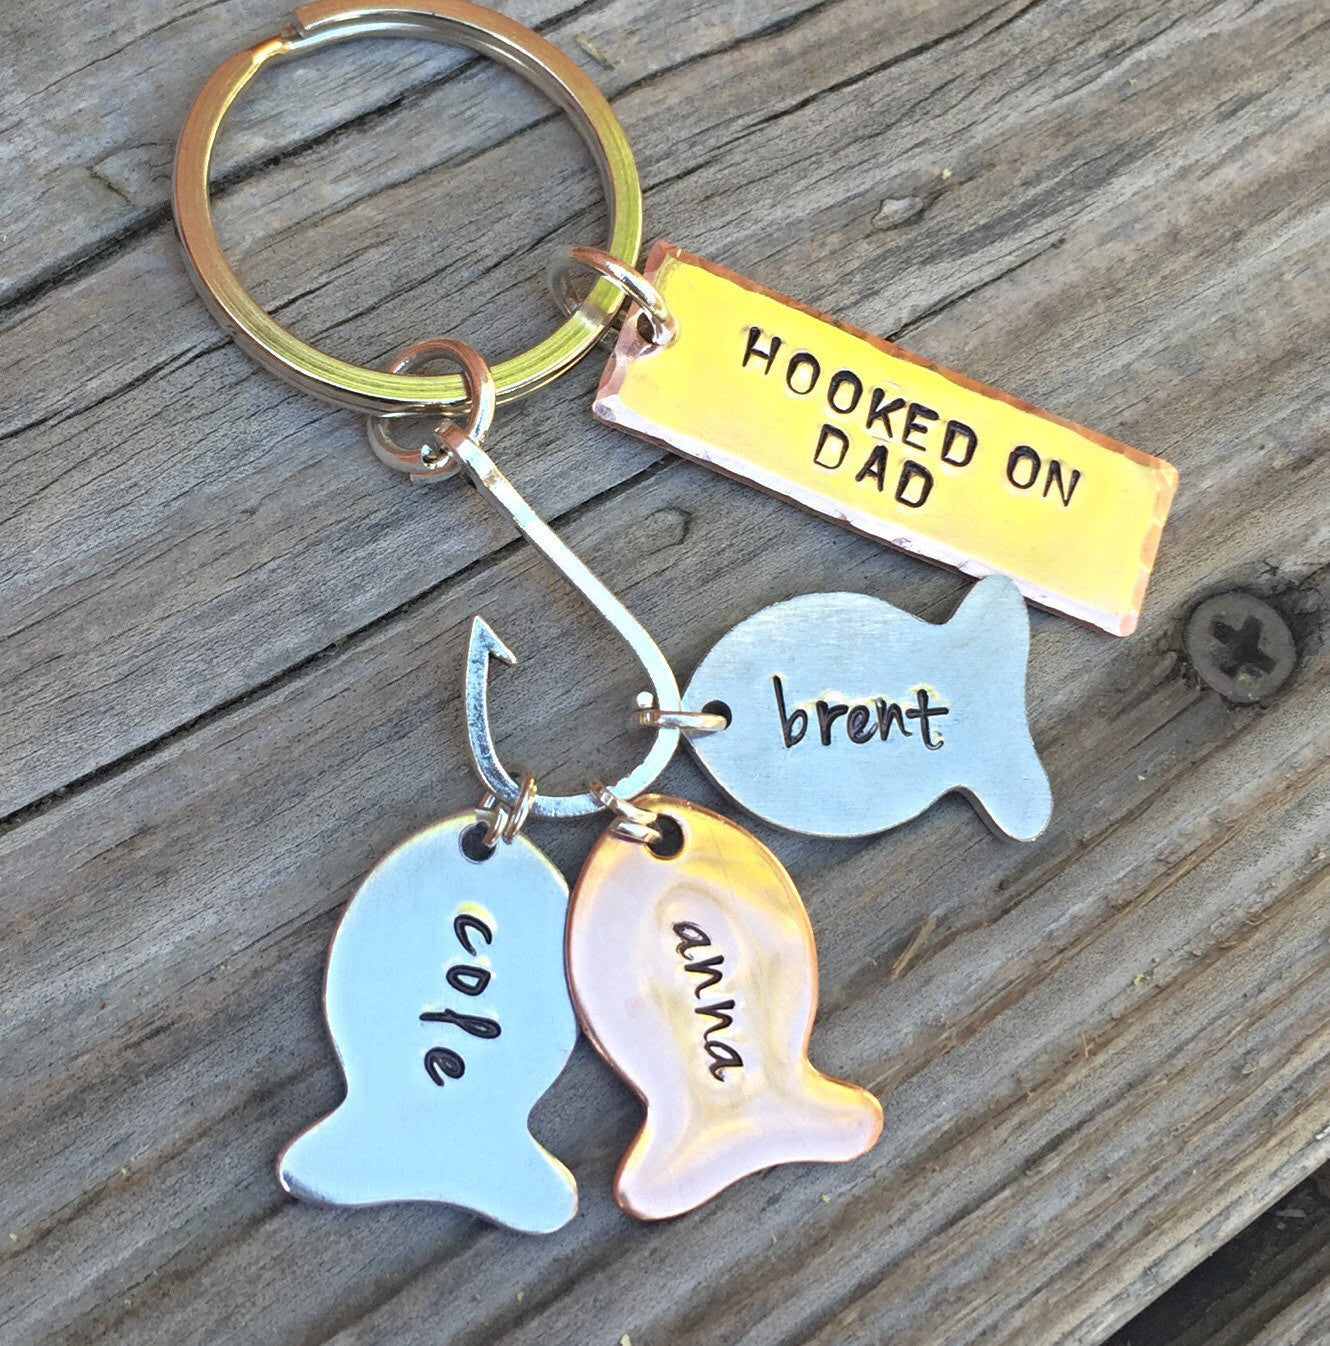 Fishing Keychain, Our Best Pape, Fishing Gifts, Personalized Fishing Keychain, Our Best Catch Dad, natashaaloha 2 Fish / Silver Fish